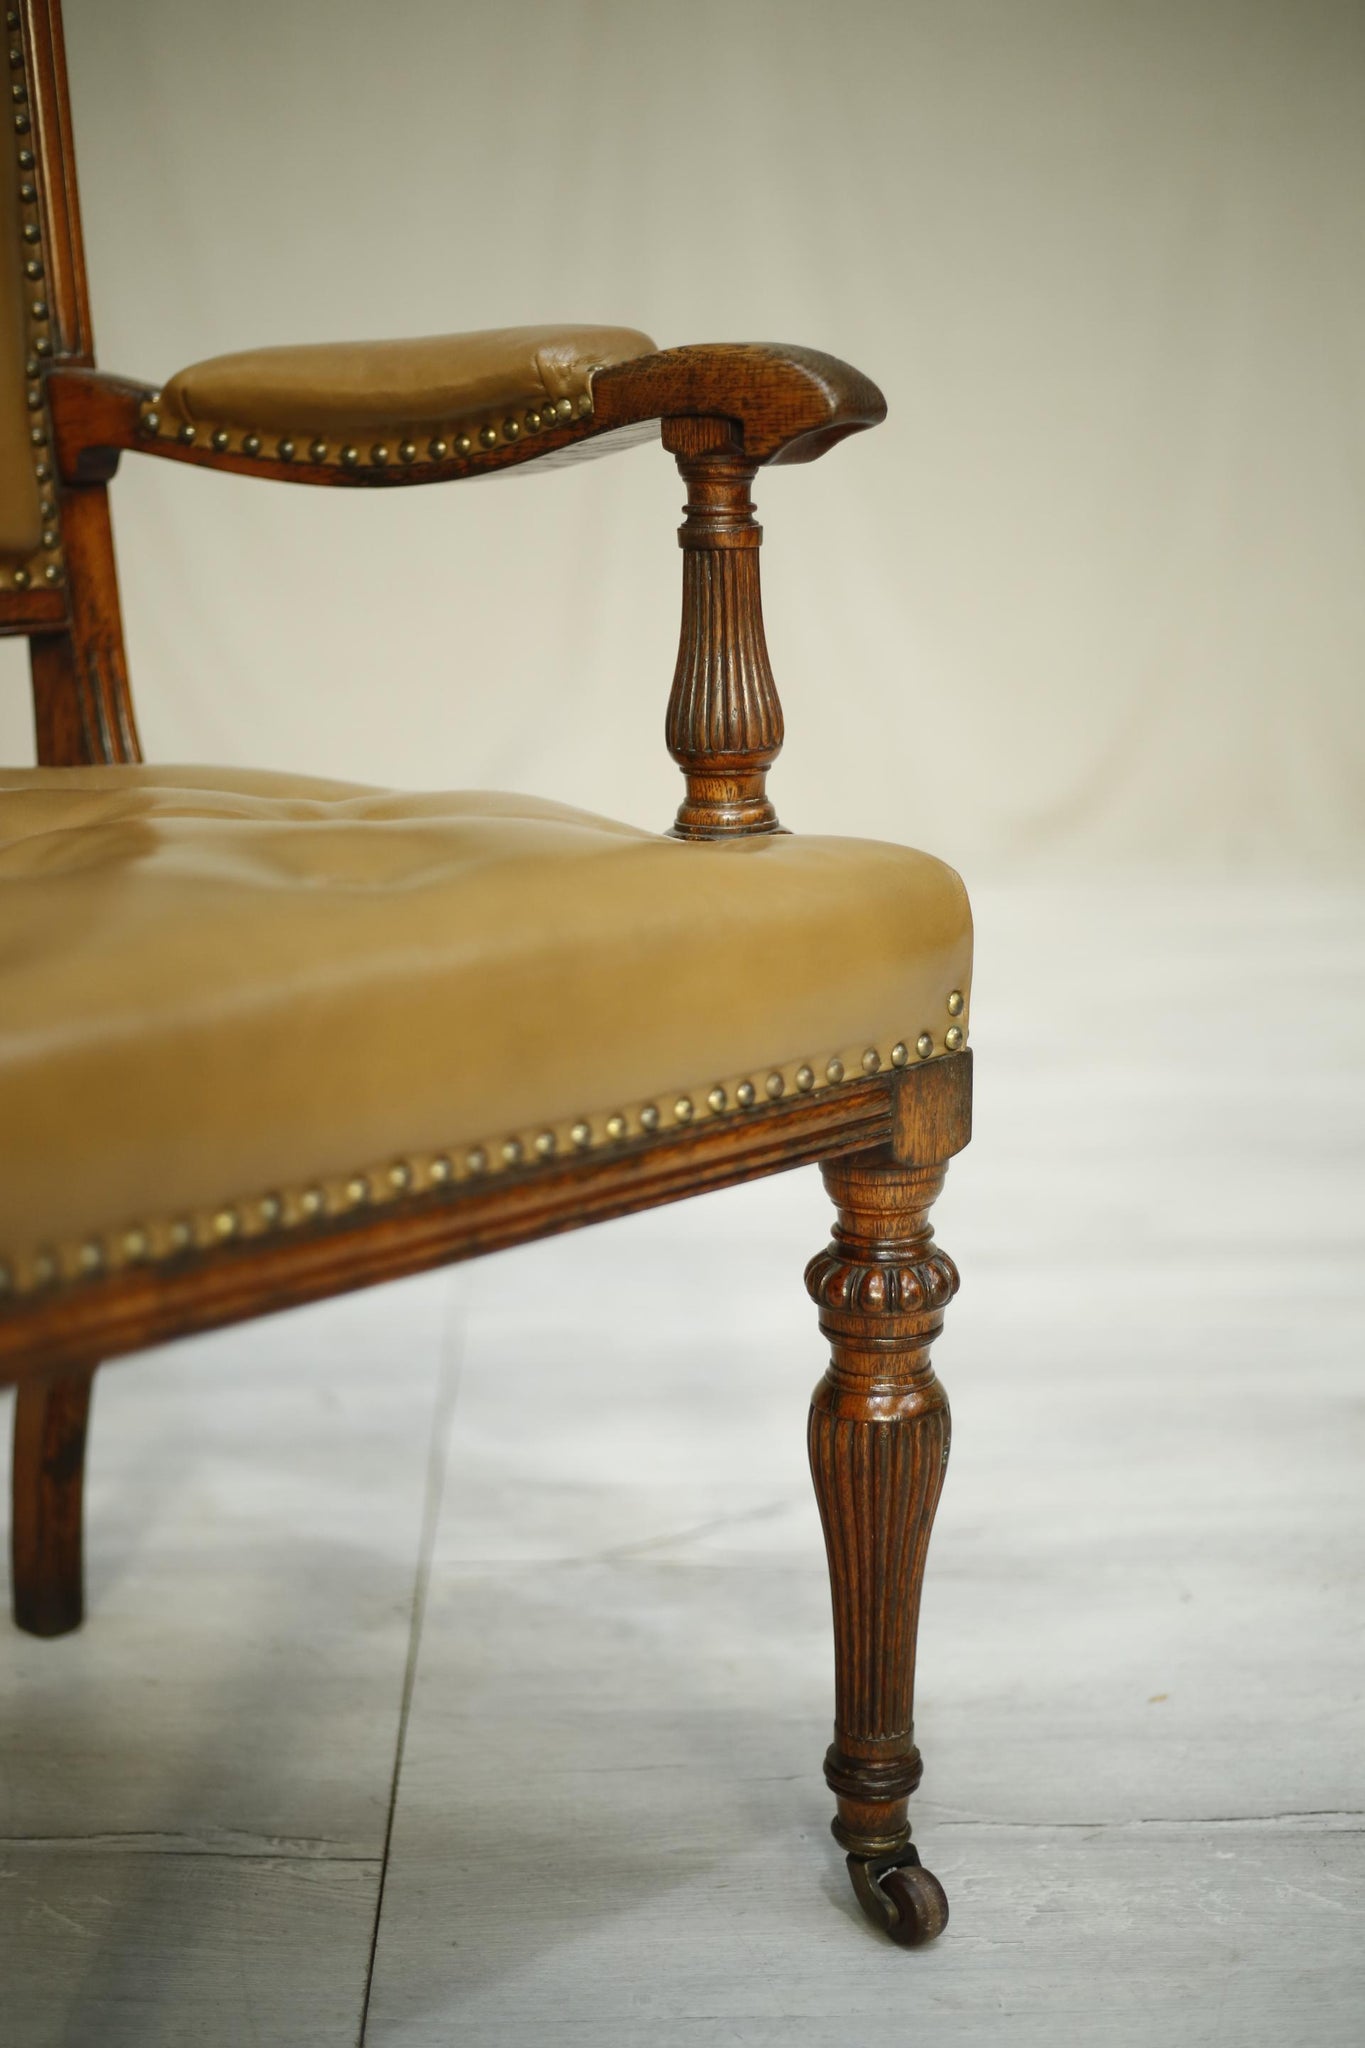 Antique 19th century oak and brown leather desk chair